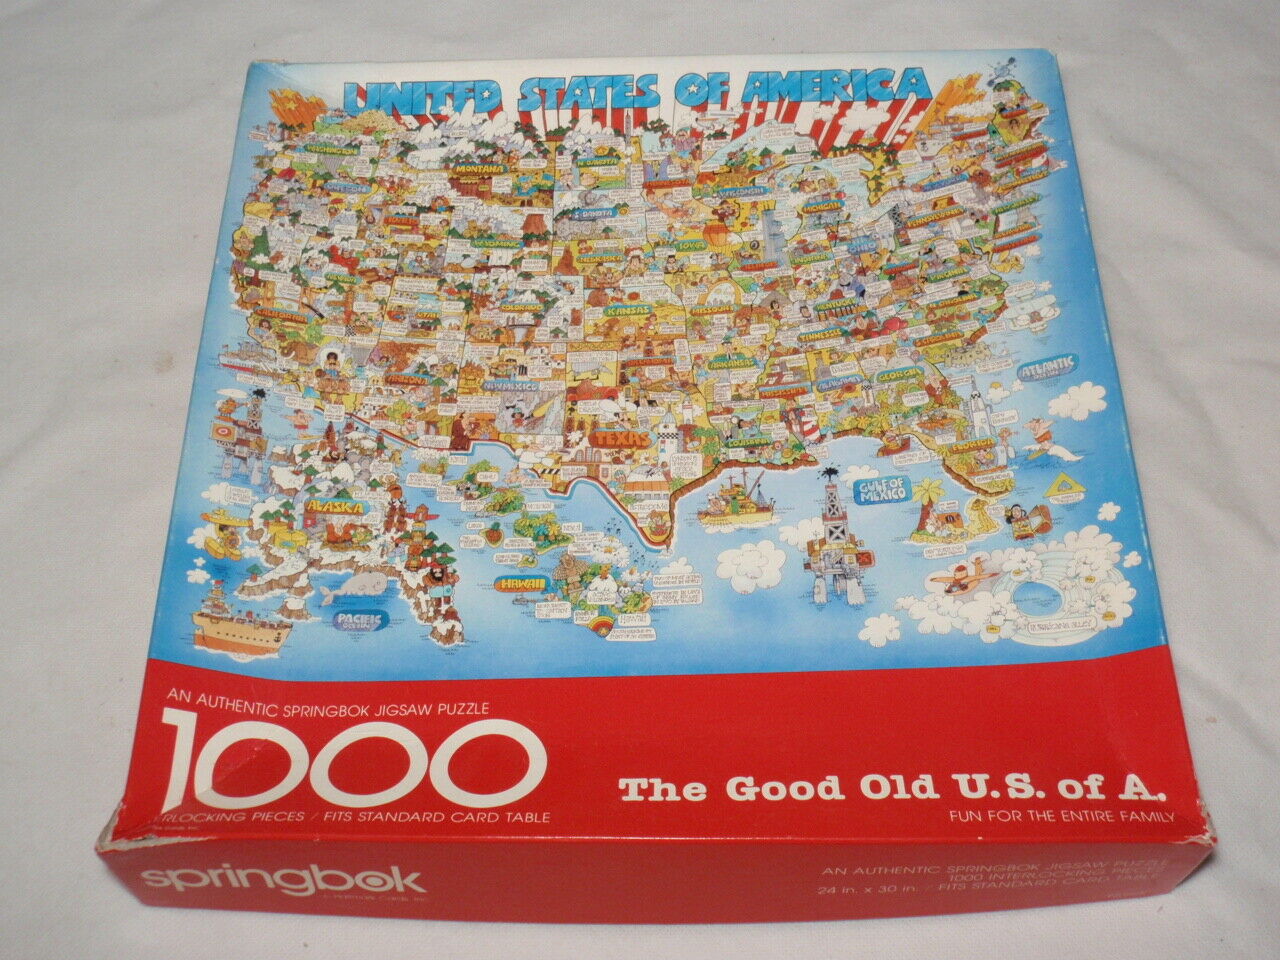 Springbok The Good Old U.s Of A 1000 Pc Puzzle *missing 1 Pc*